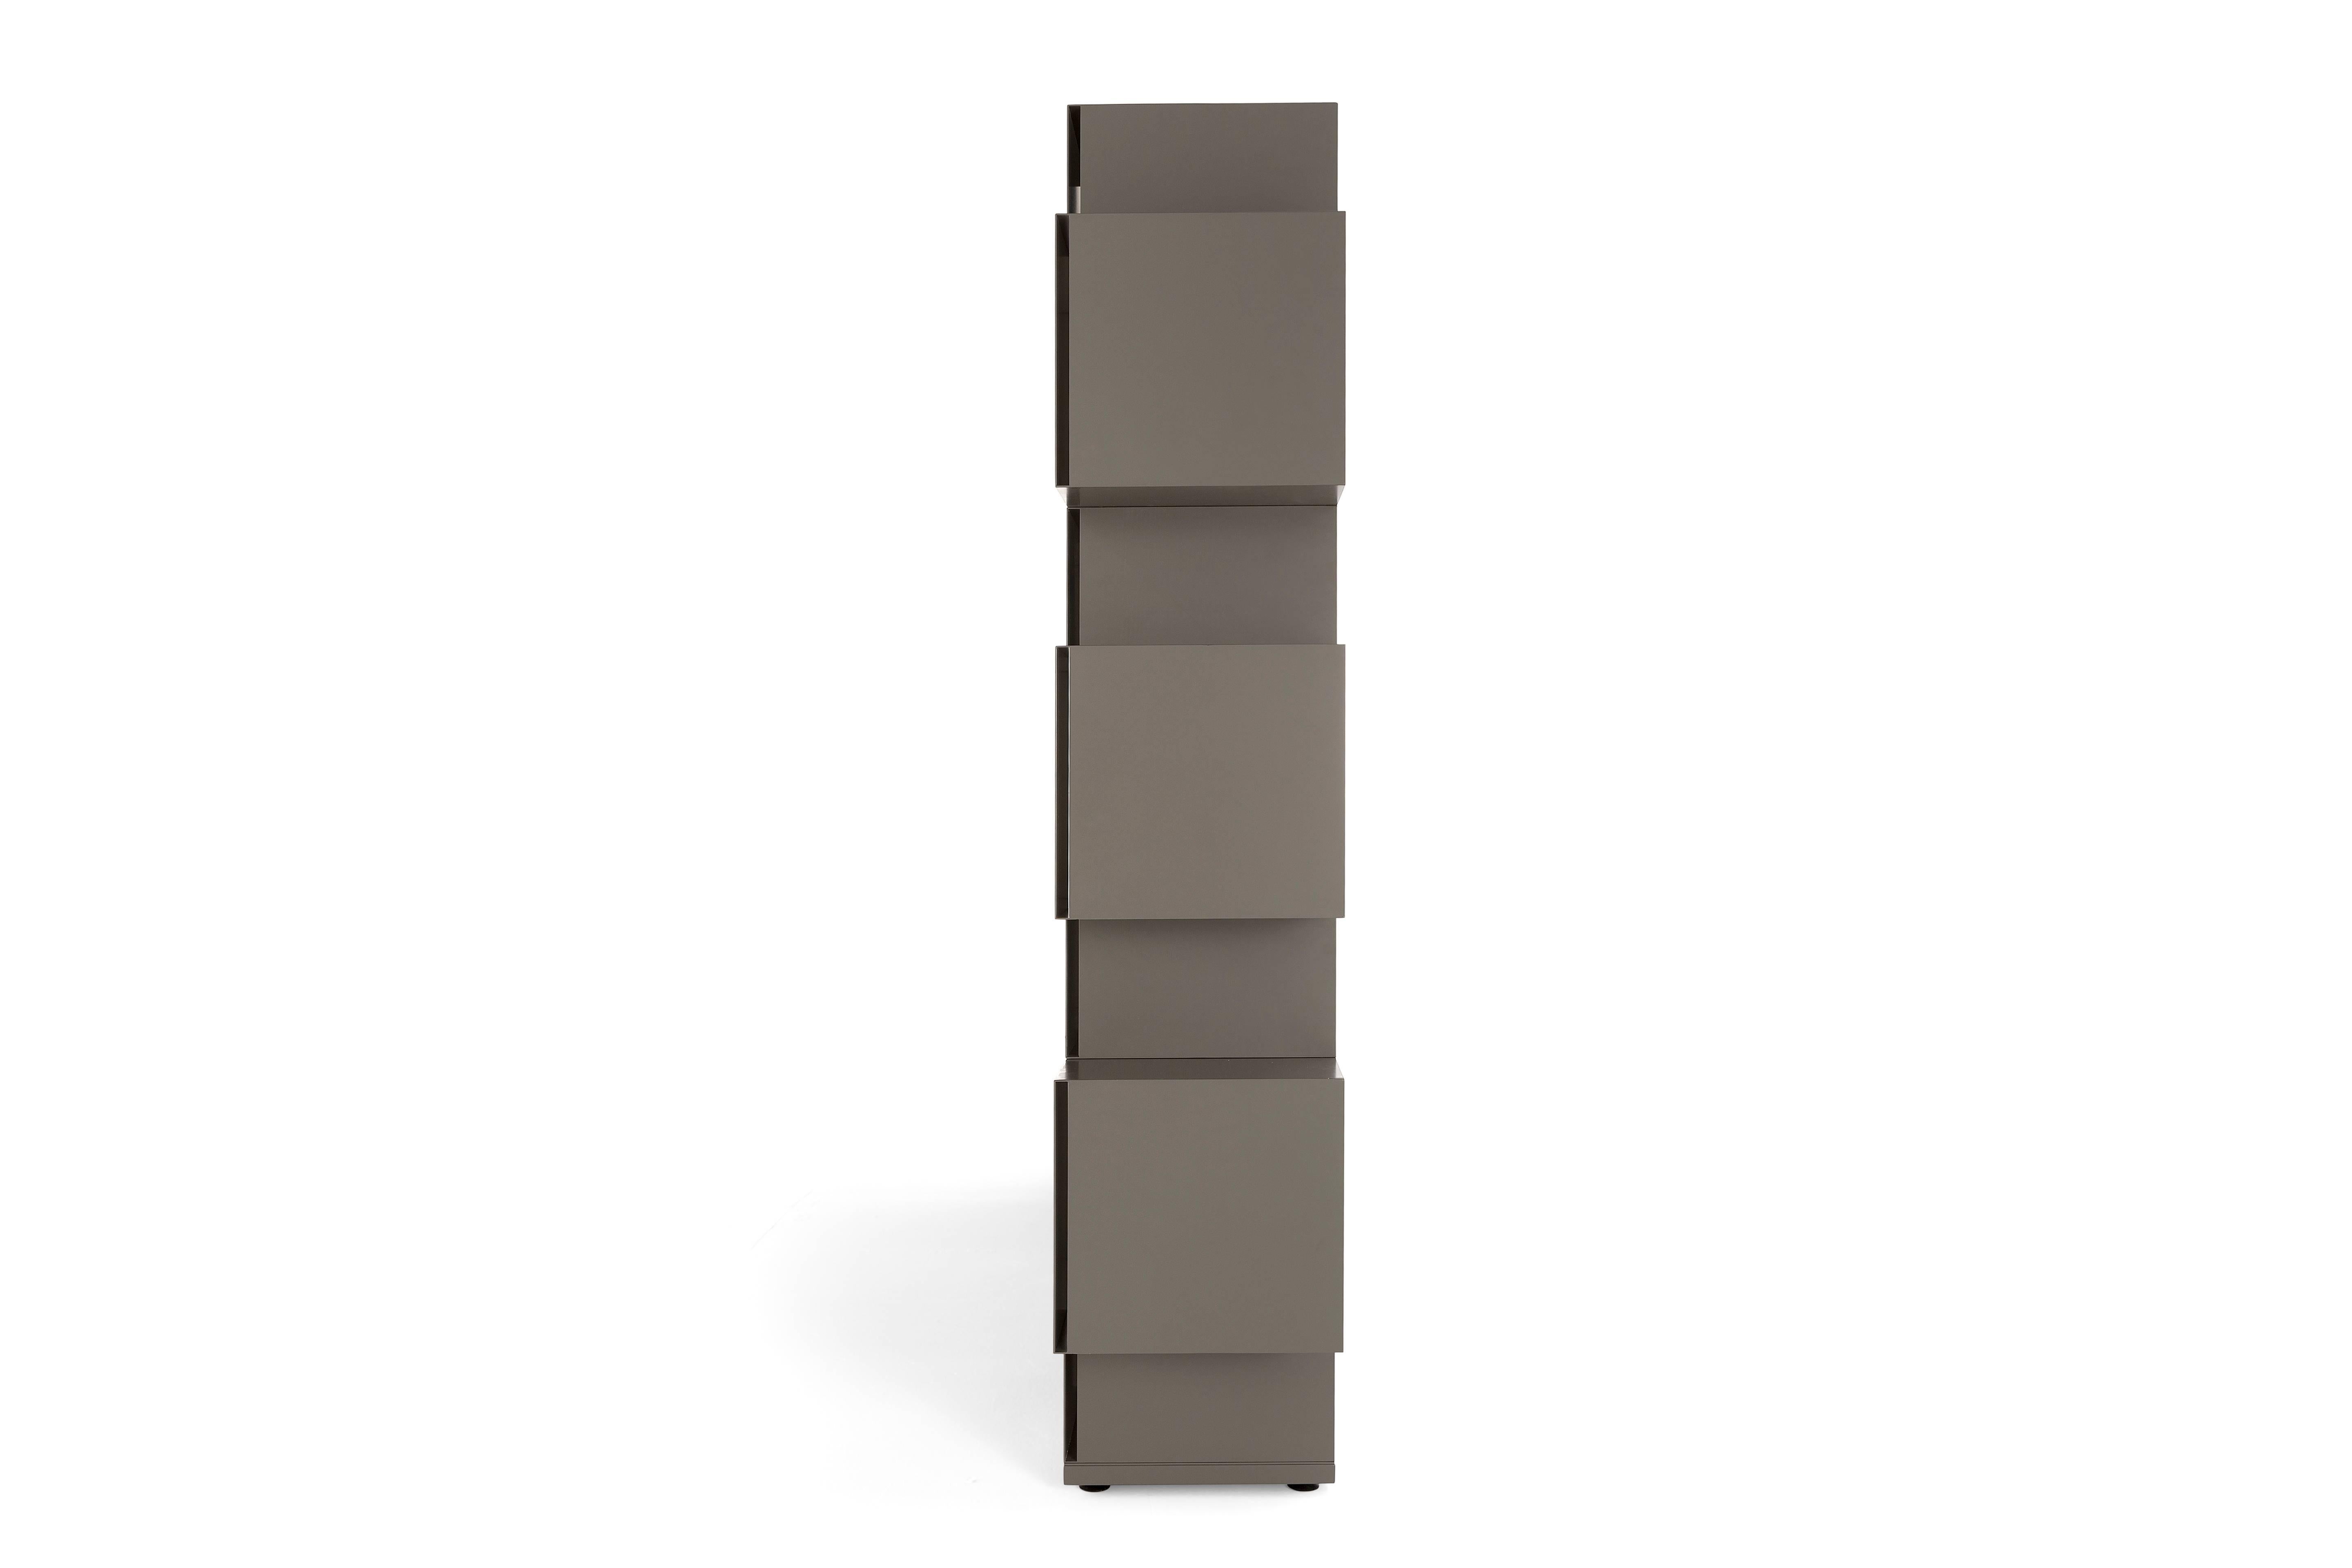 Eresia

Geometry and strictness characterize this particular bookcase in a way that combines design and functionality.

In Eresia volumes alternate in a balanced play of proportions. Cubes and parallelepipeds are spaced out with openings in a